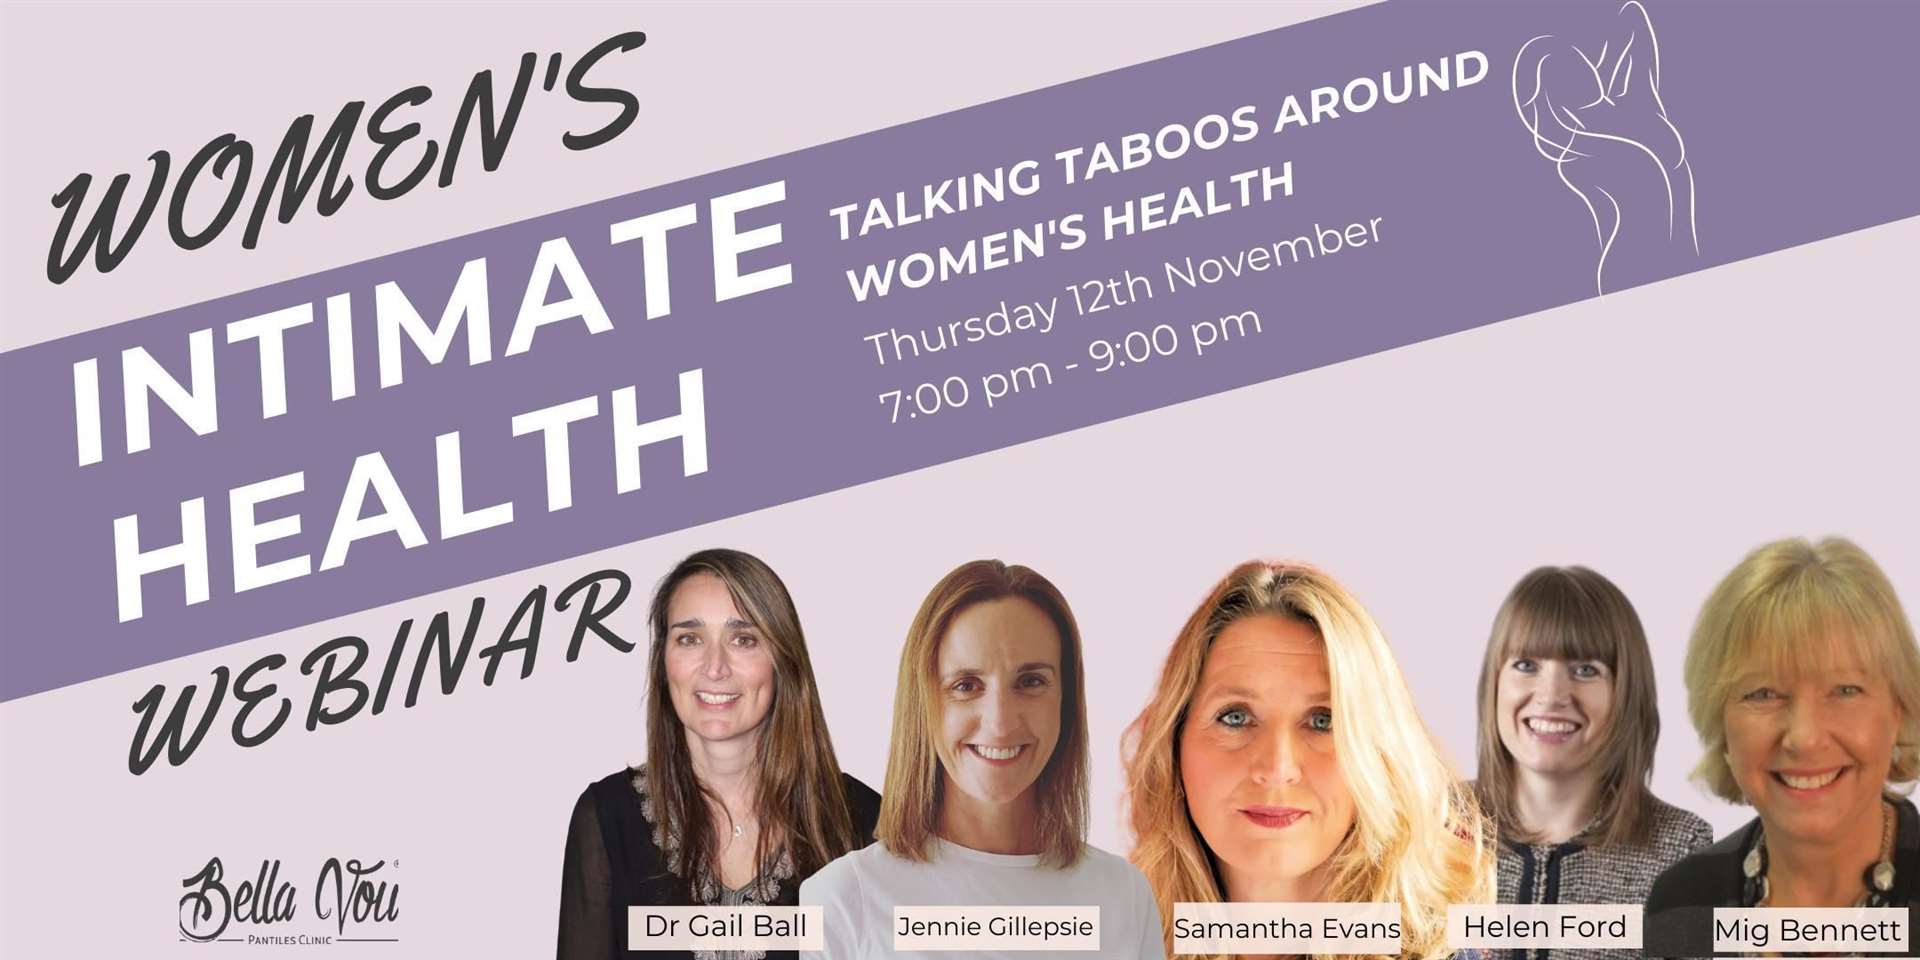 The ‘Women’s Intimate Health Webinar’ will also include special offers for those in attendance and a chance to win prizes.